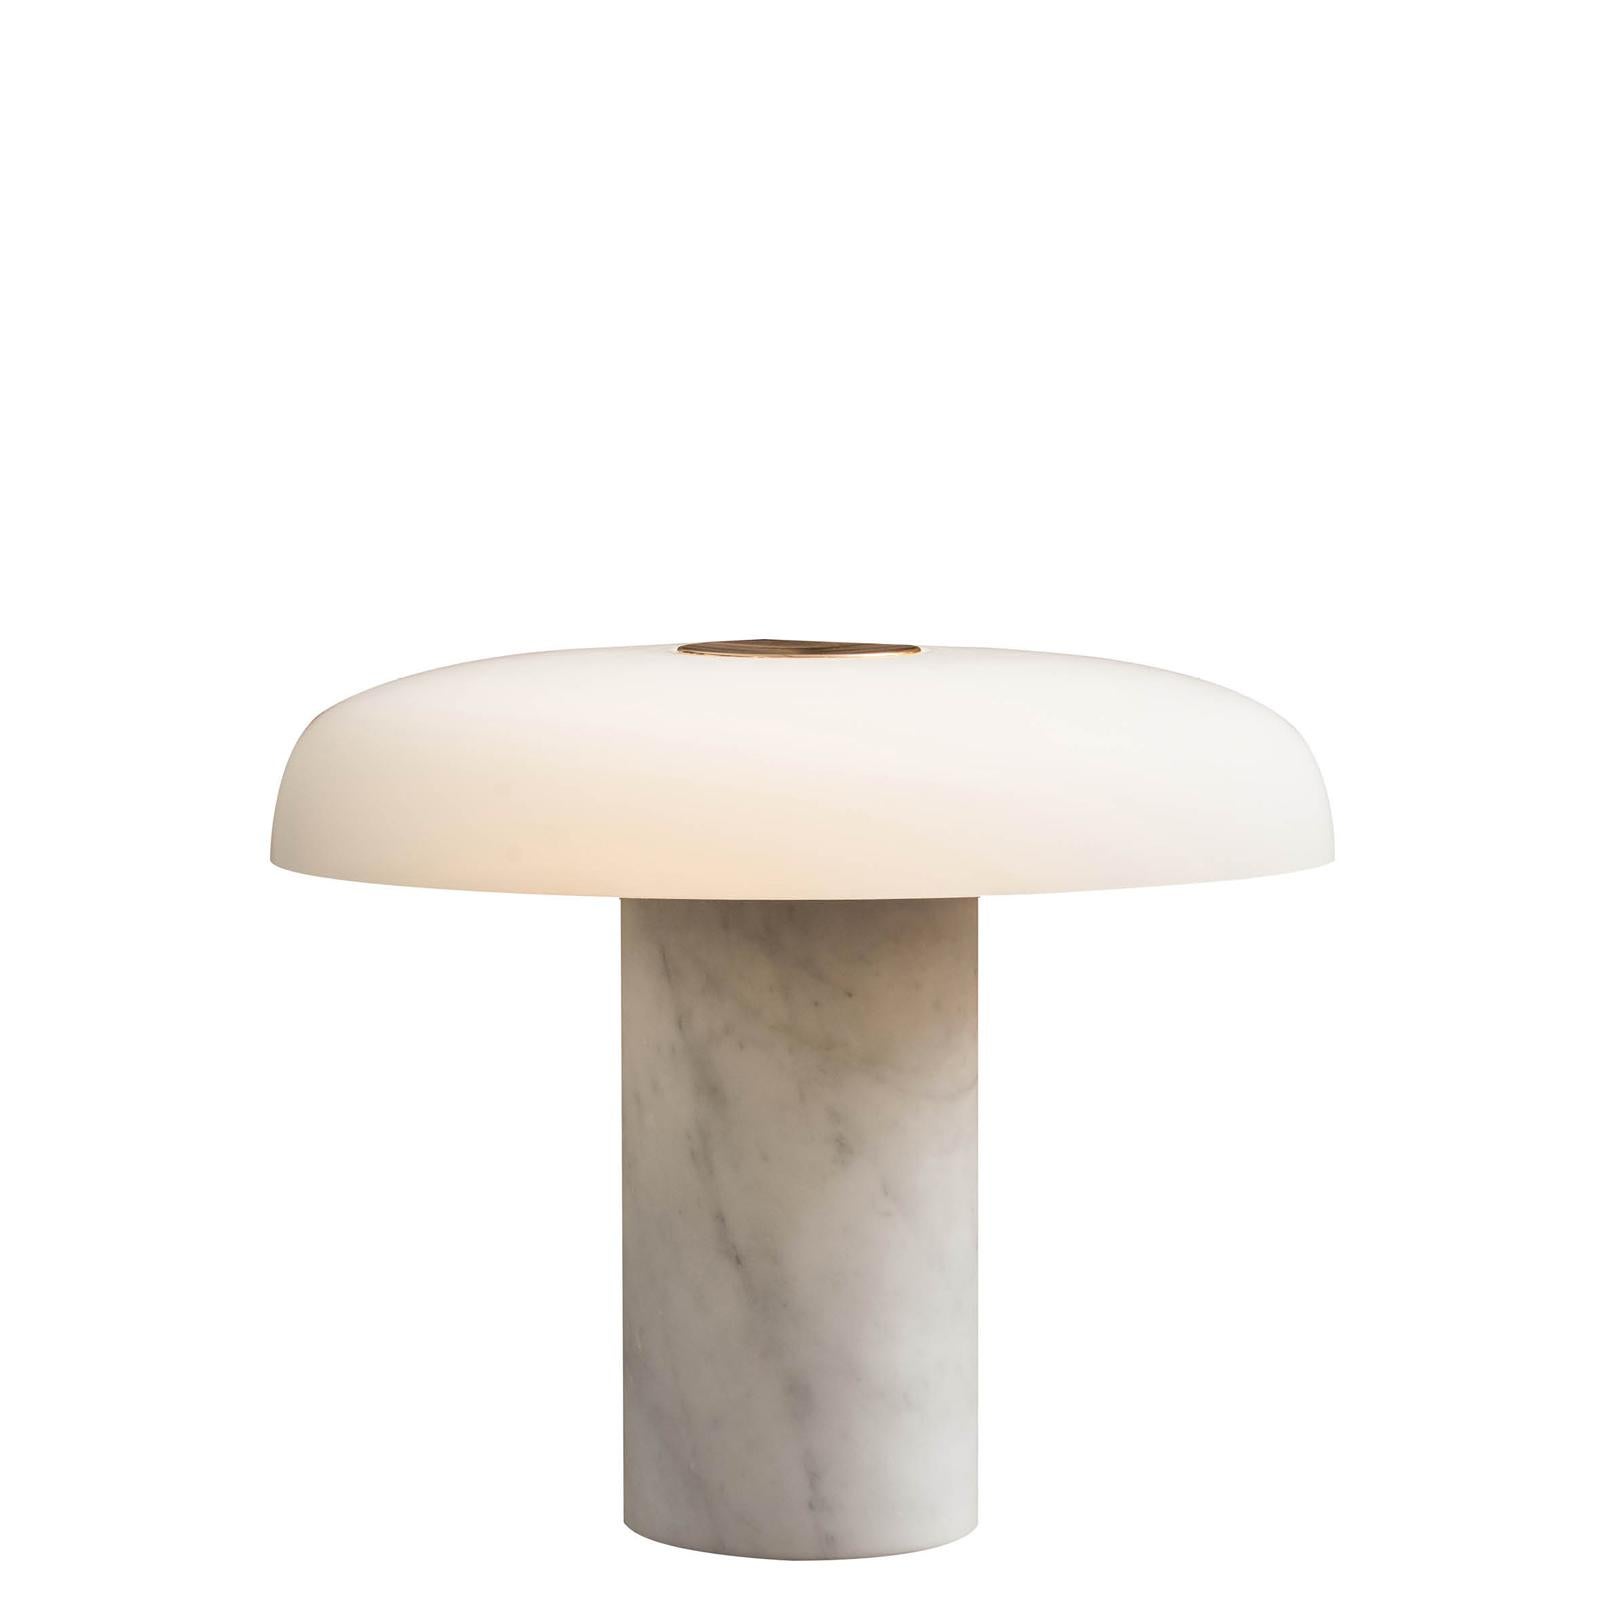 Large Fontana Arte 'Tropico' White Marble & Glass Table Lamp by Studio Buratti In New Condition For Sale In Glendale, CA